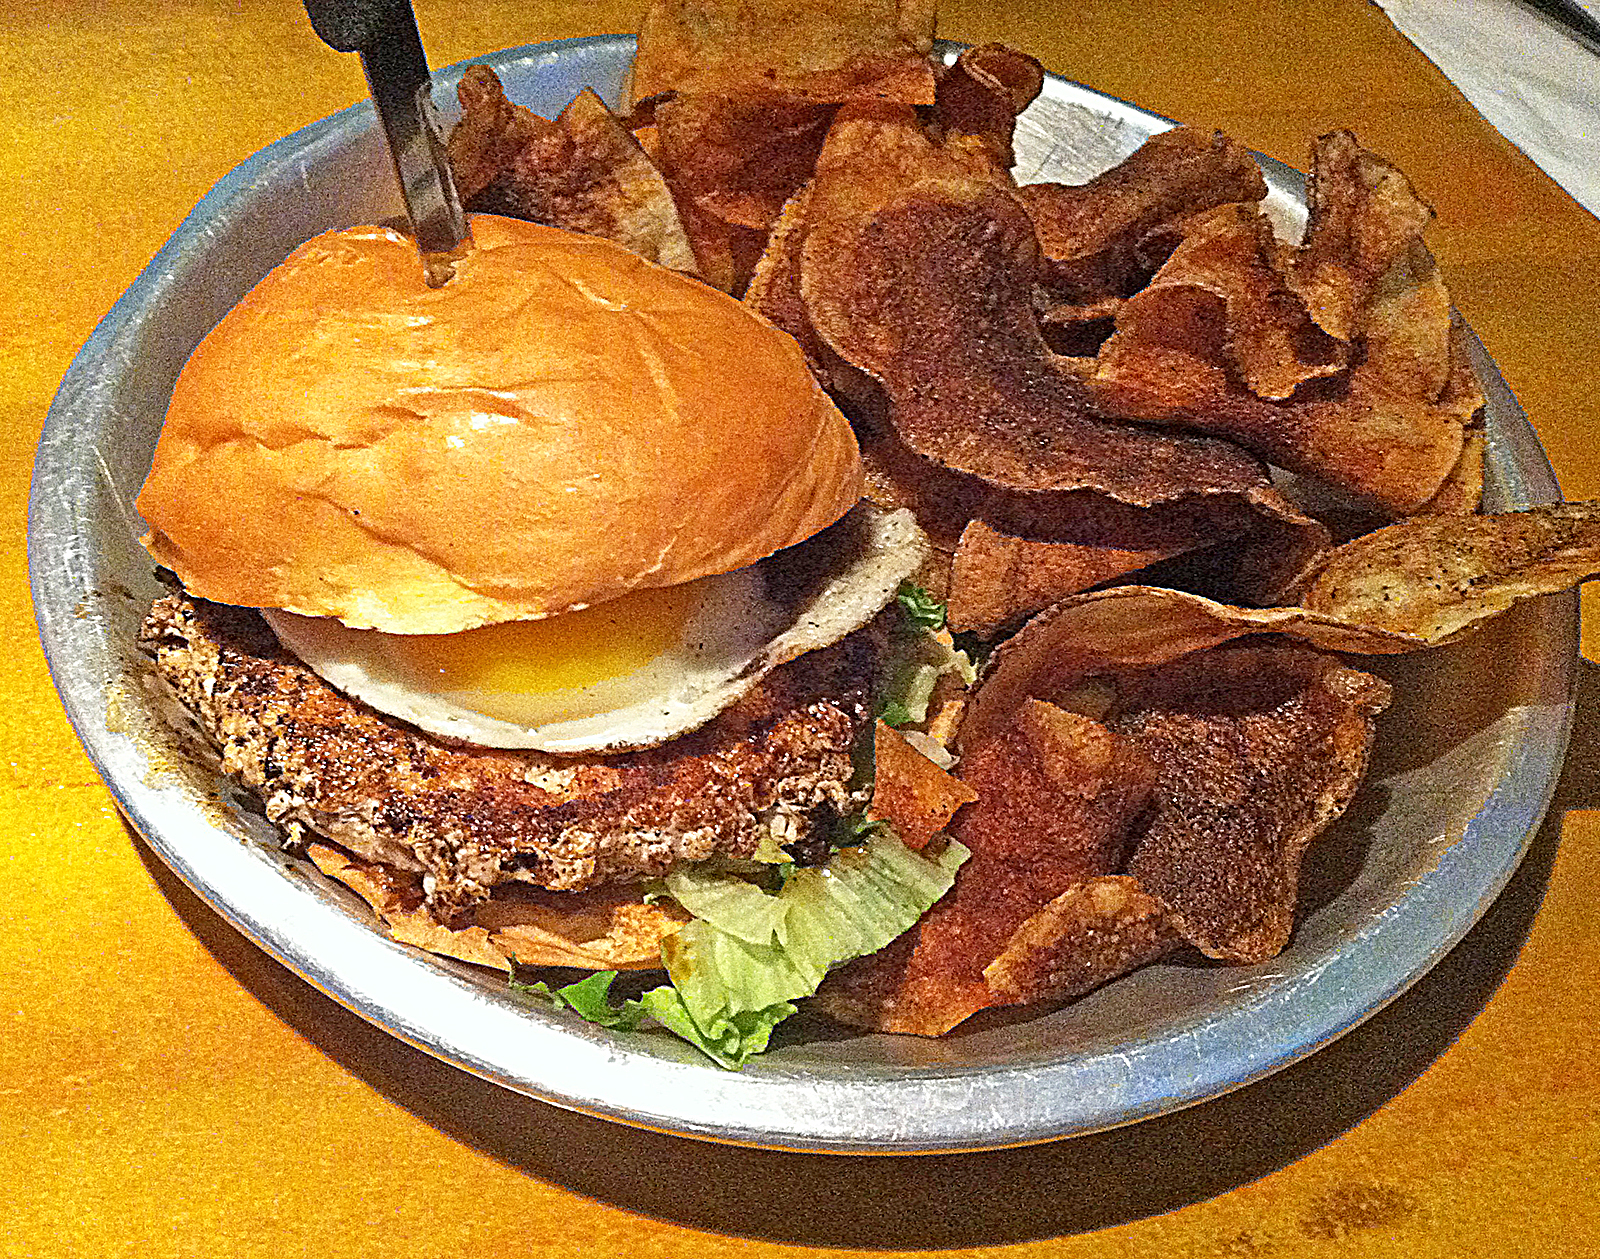 Burger Bar 419's second location just as juicy as first ...